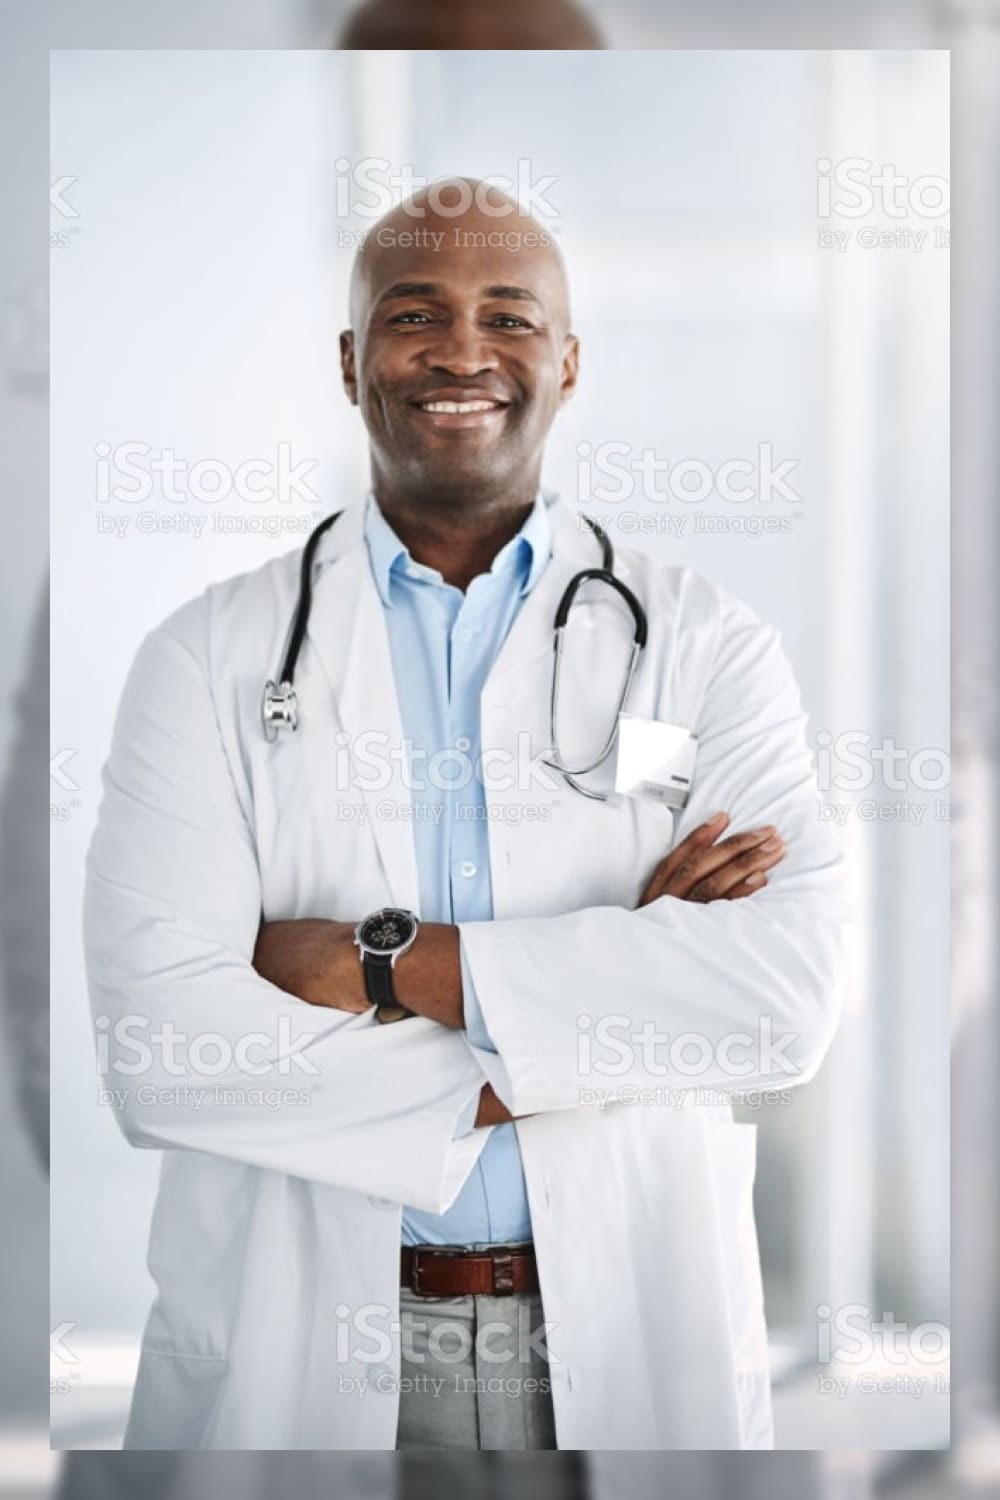 In it for the good of your health stock photo.